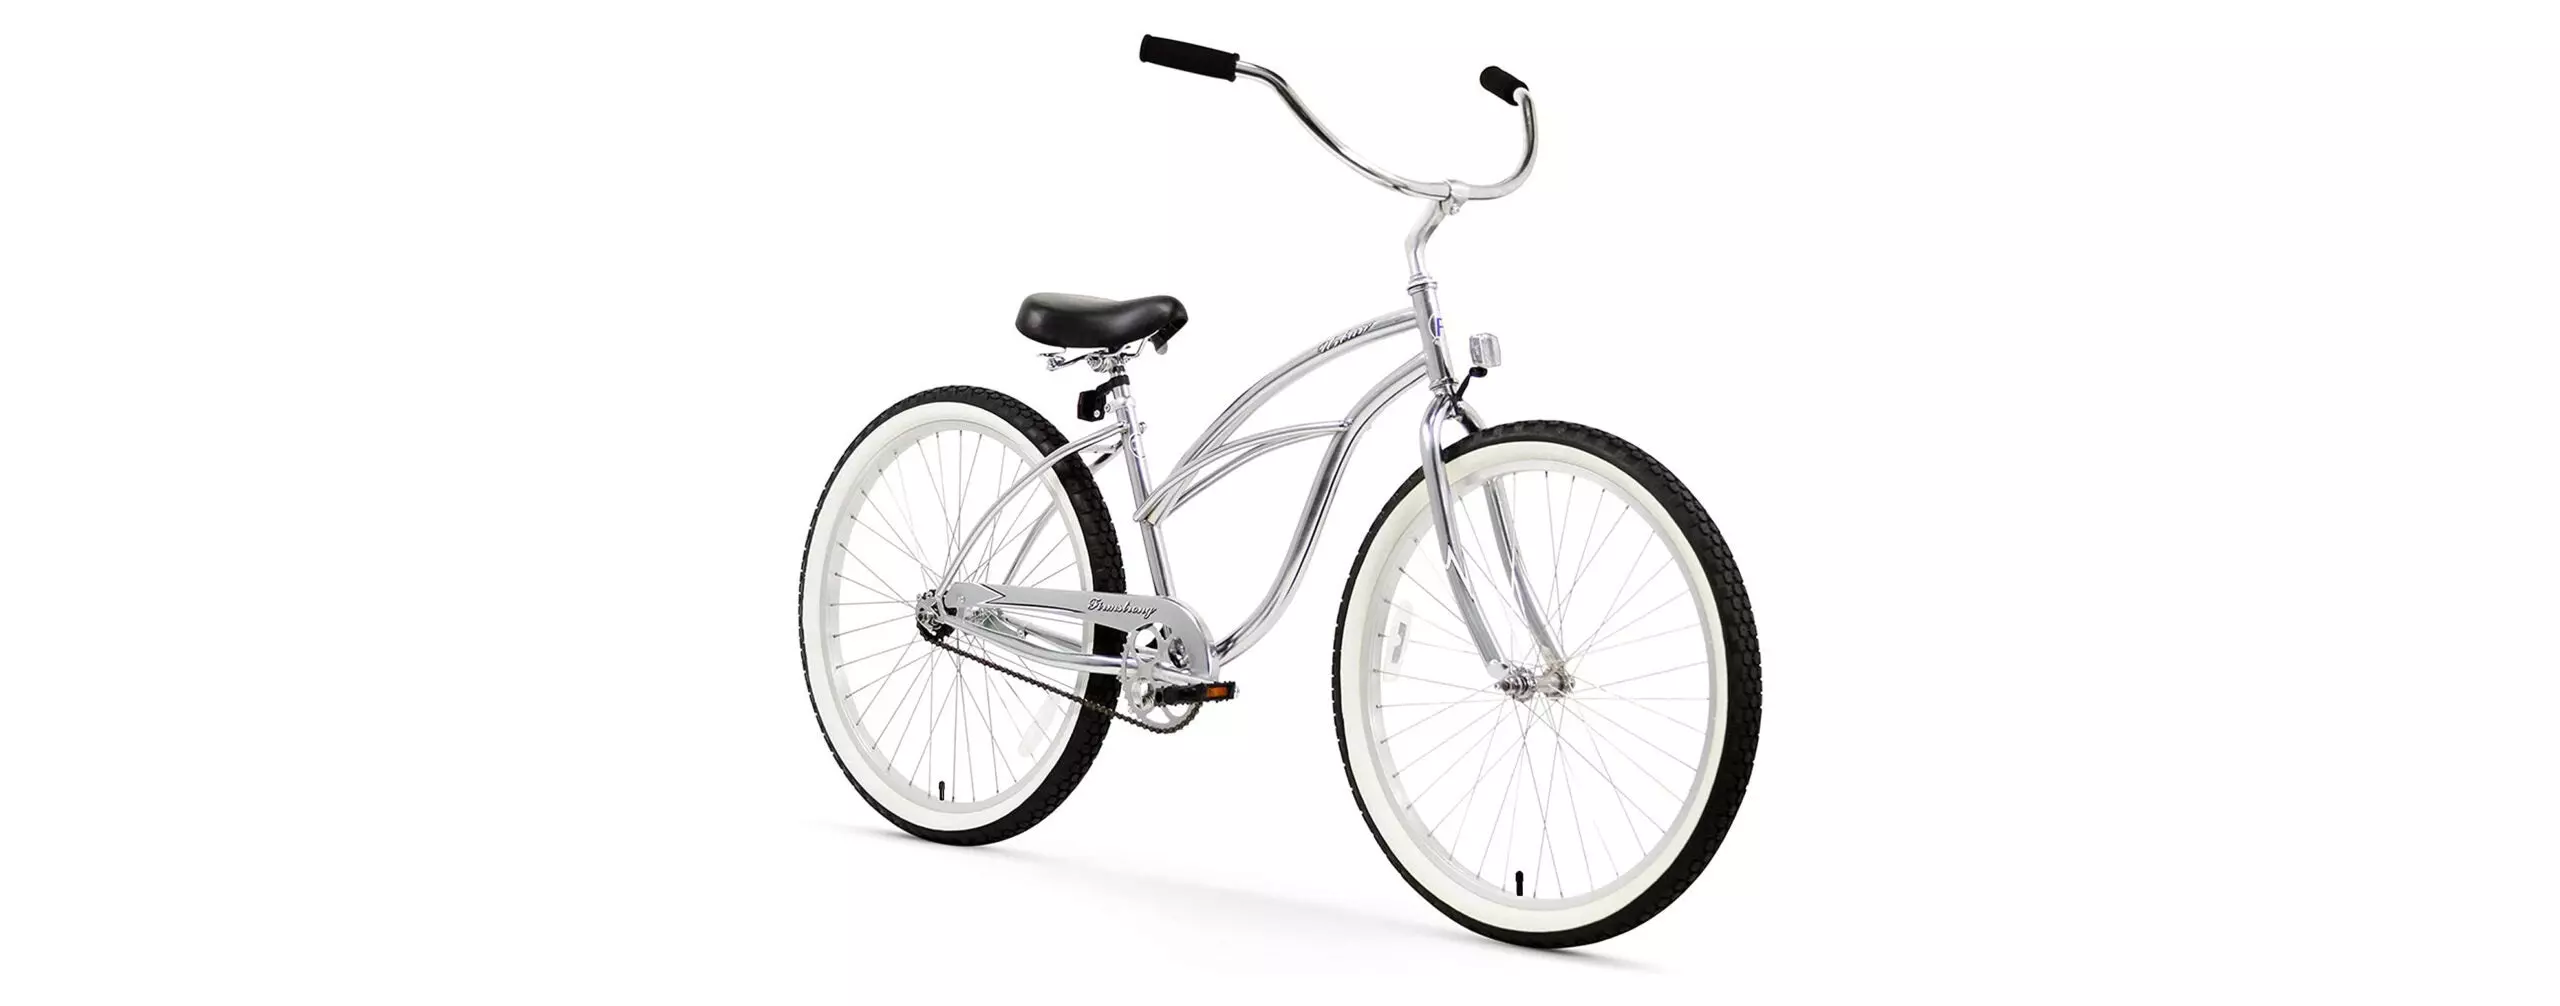 The Best Women’s Comfort Bike (Review and Buying Guide) in 2022